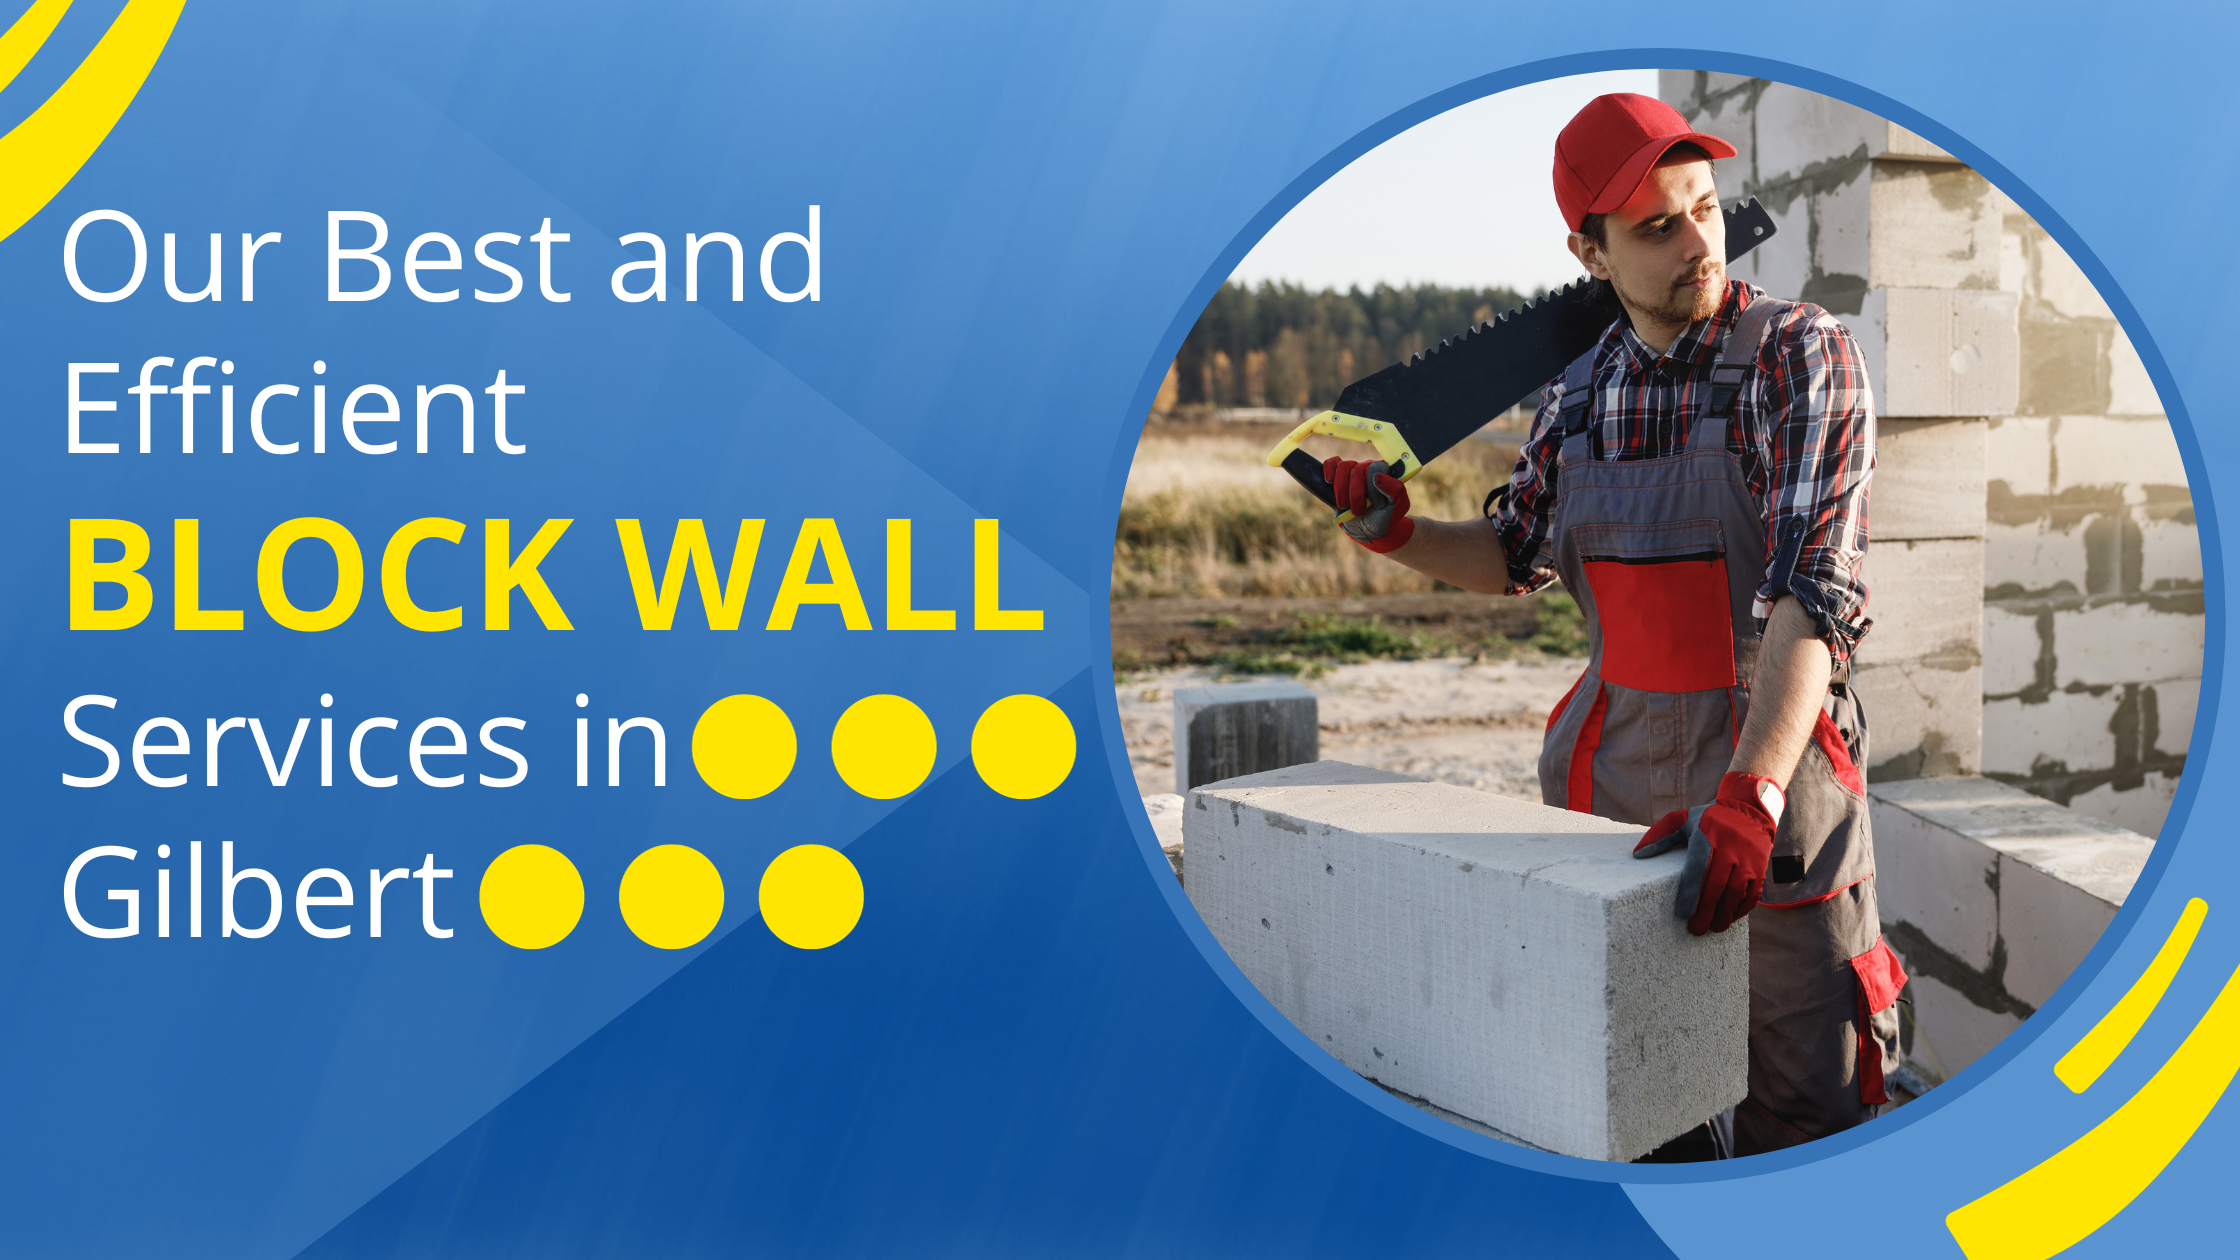 Knowledge about Block Wall Services